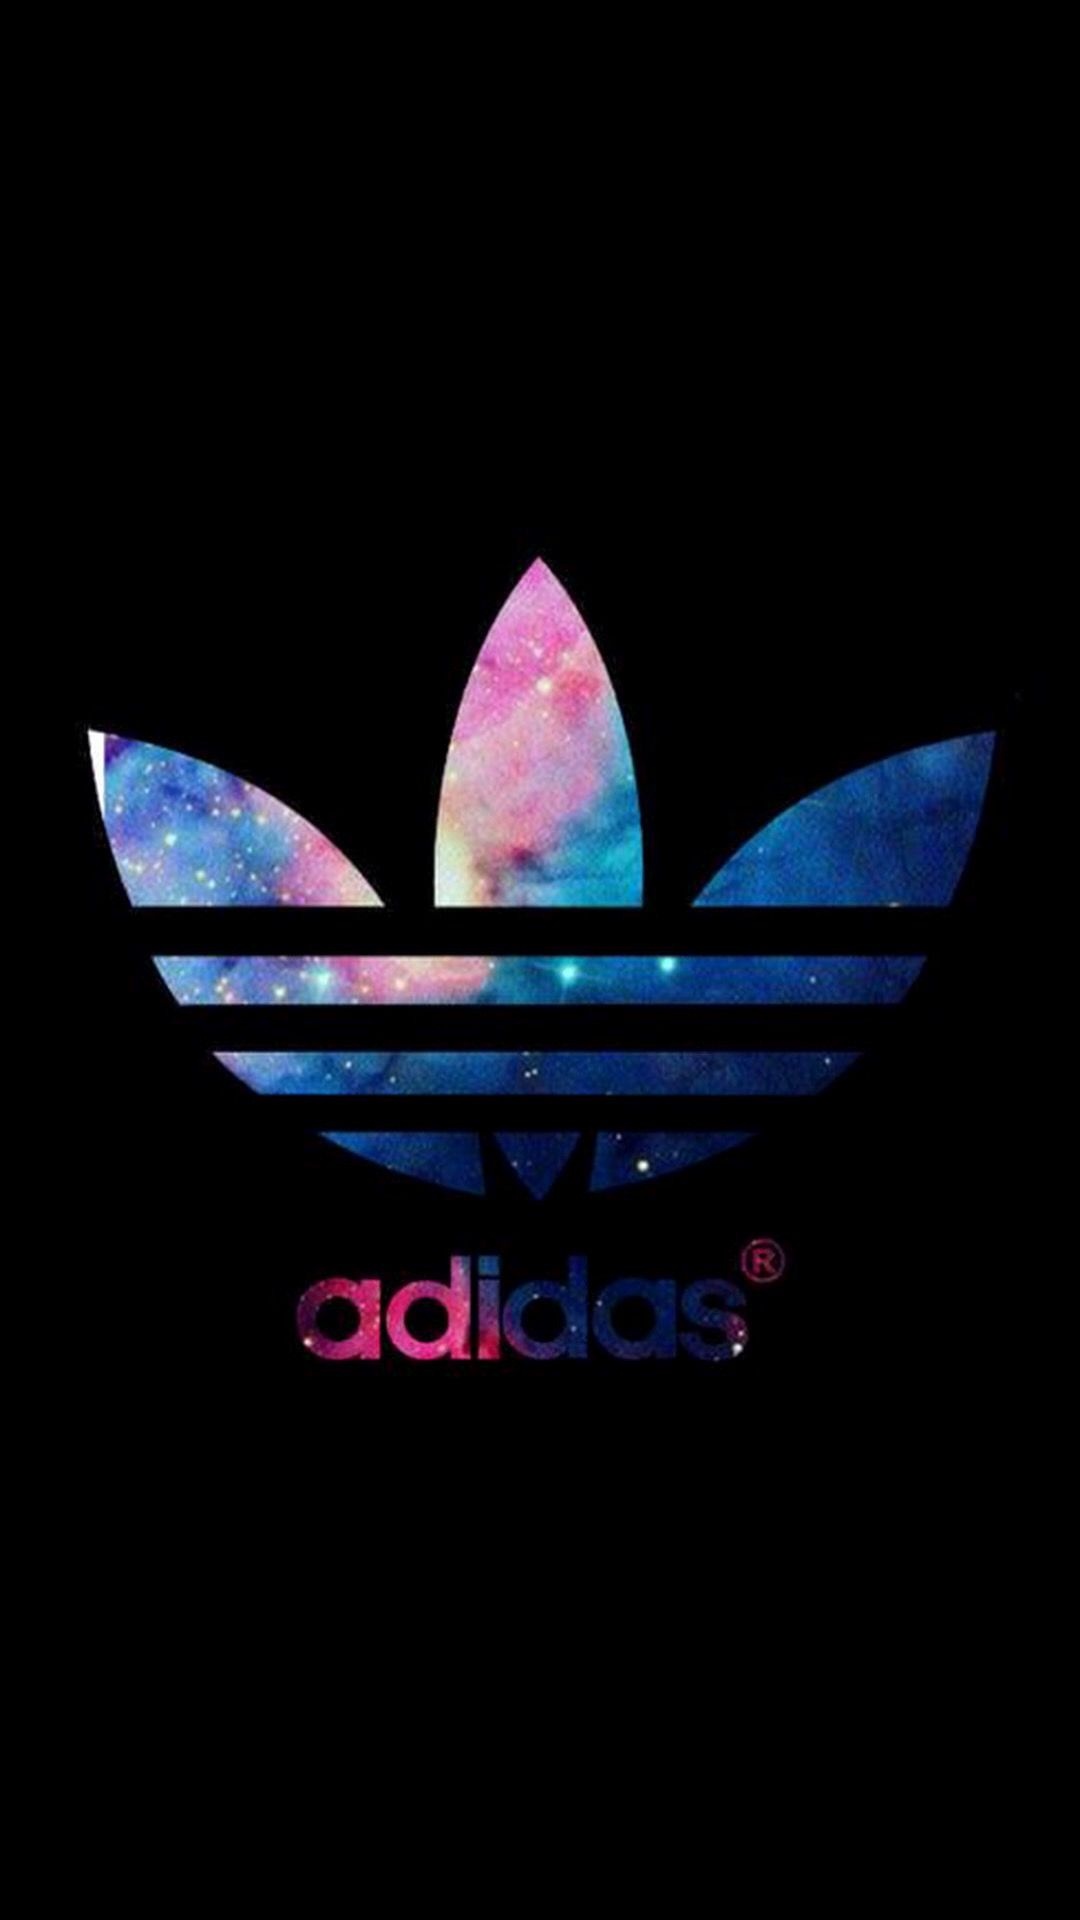 Adidas logo, New wallpaper, Exclusive offers, Brand promotion, 1080x1920 Full HD Handy